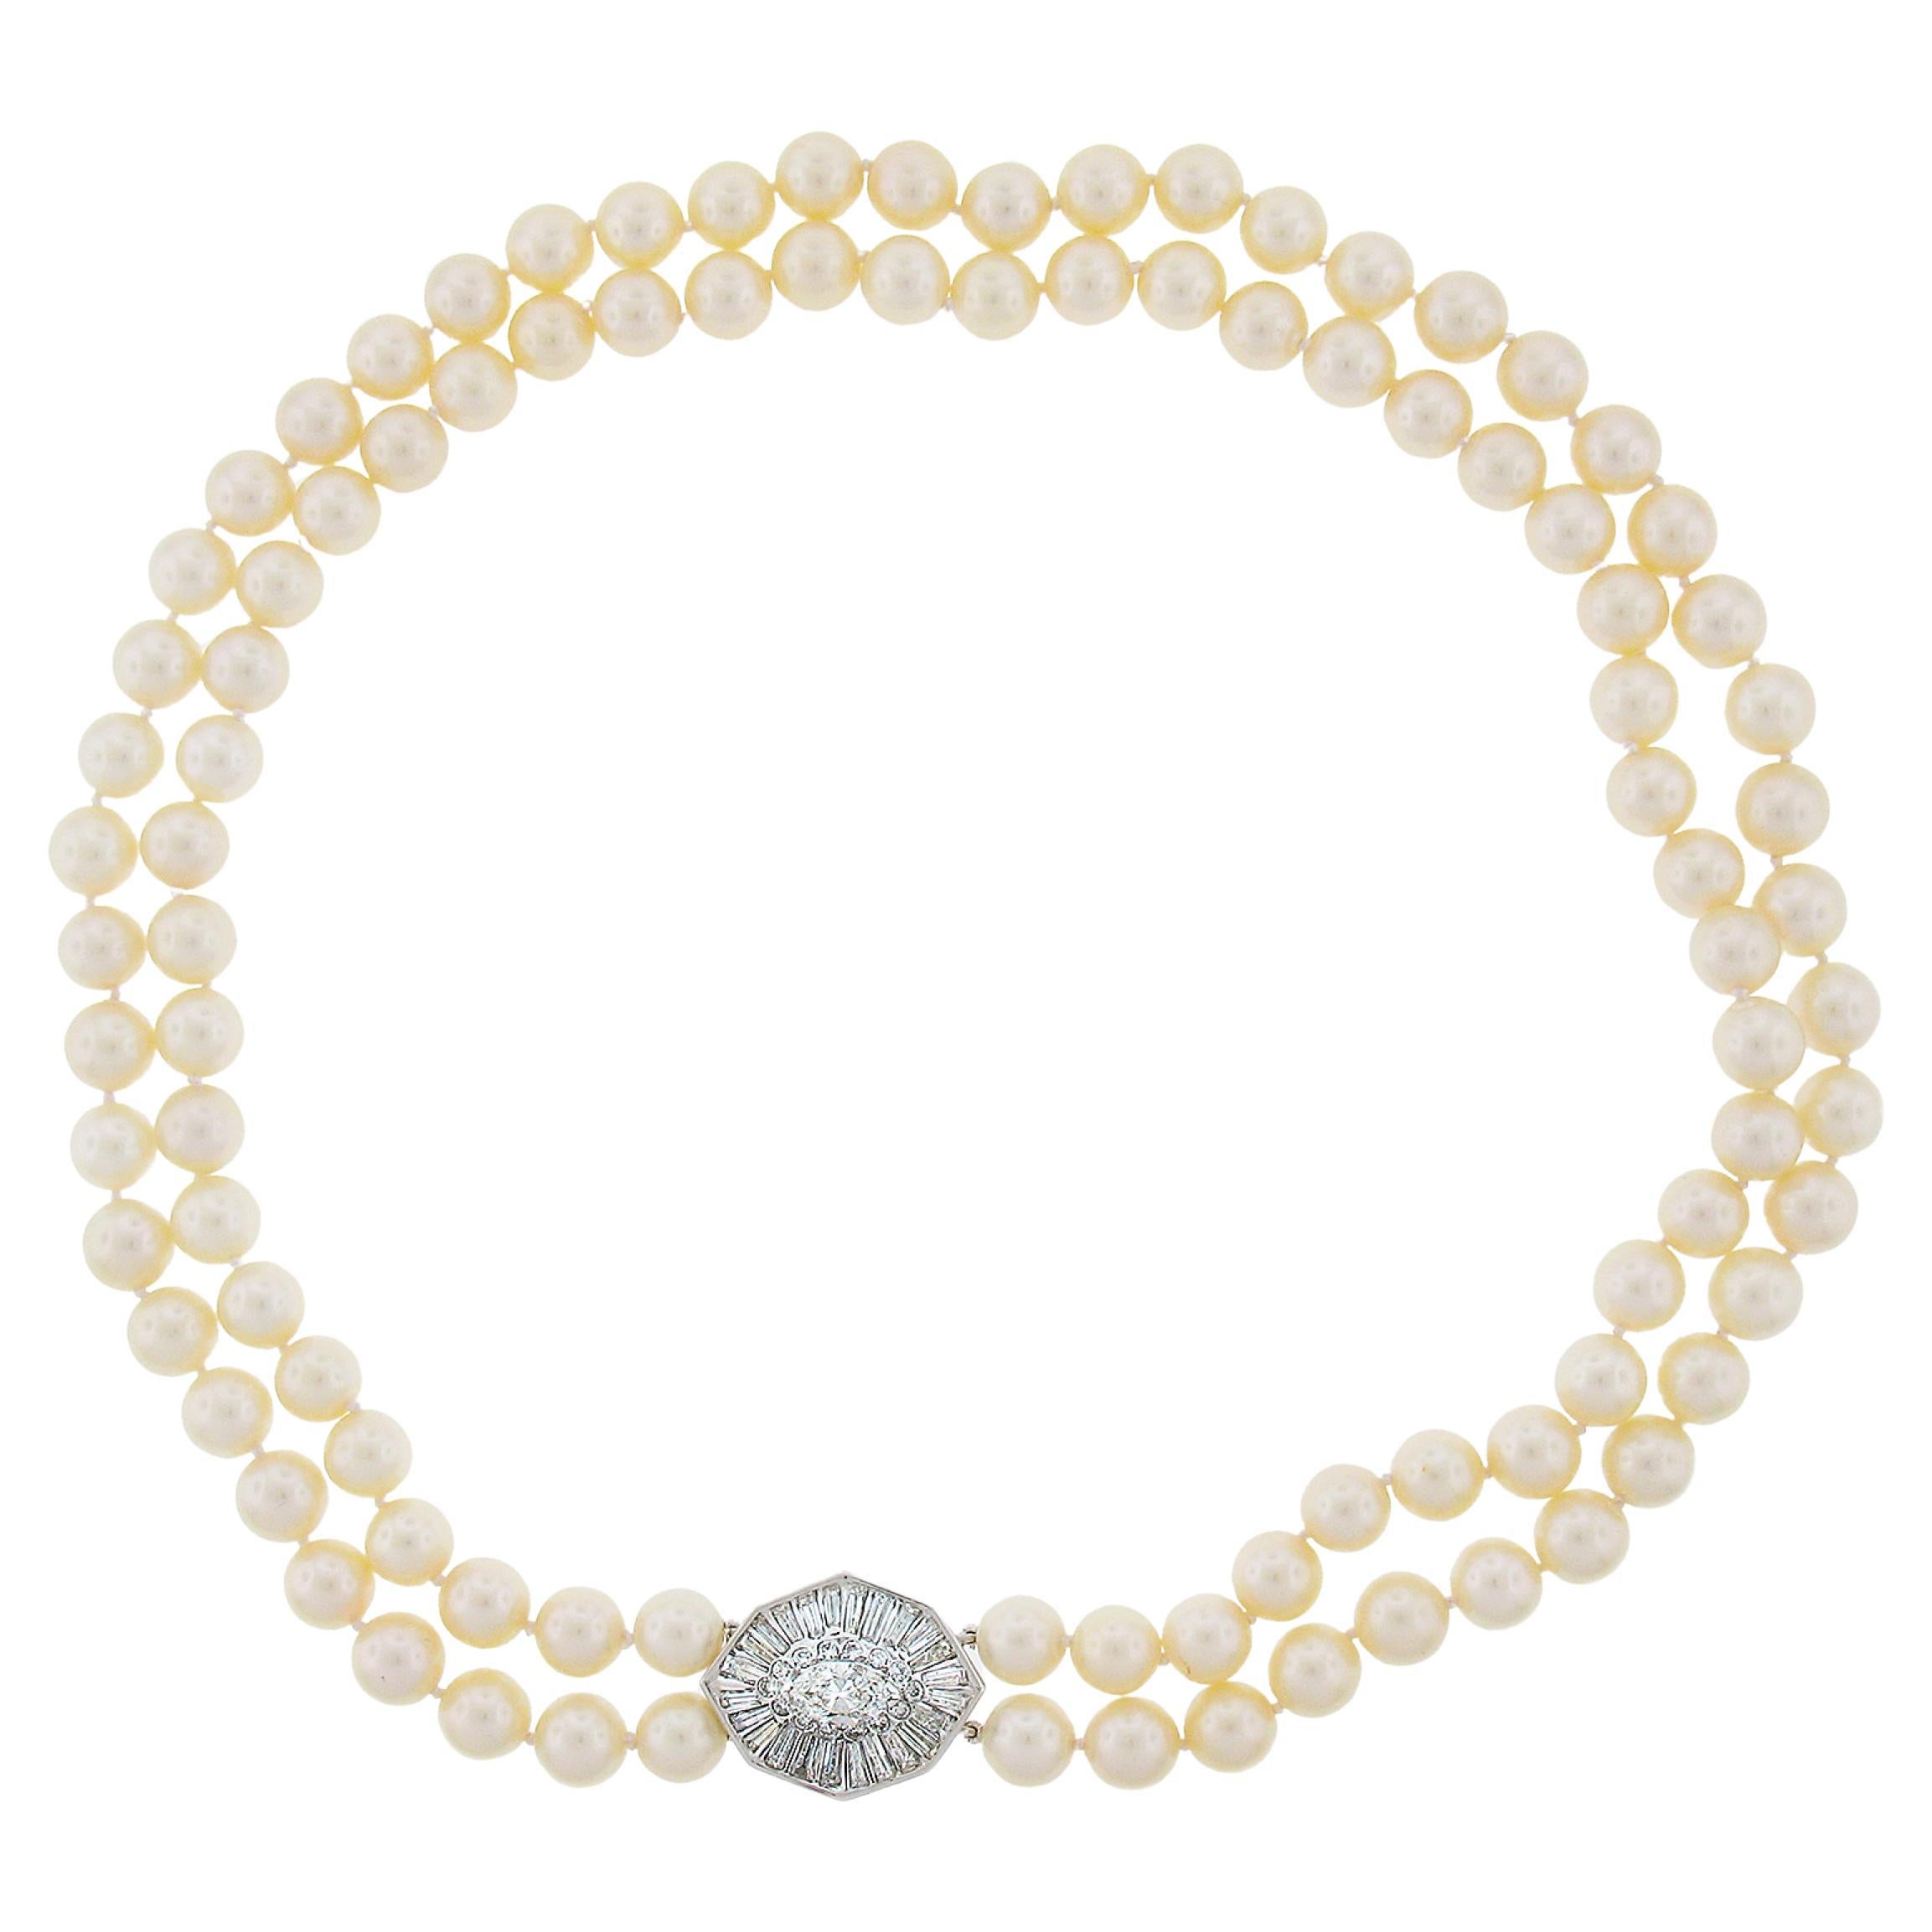 18k White Gold Dual Strand 8-8.5mm Pearl Necklace w/ GIA 3.68ctw Diamond Clasp For Sale